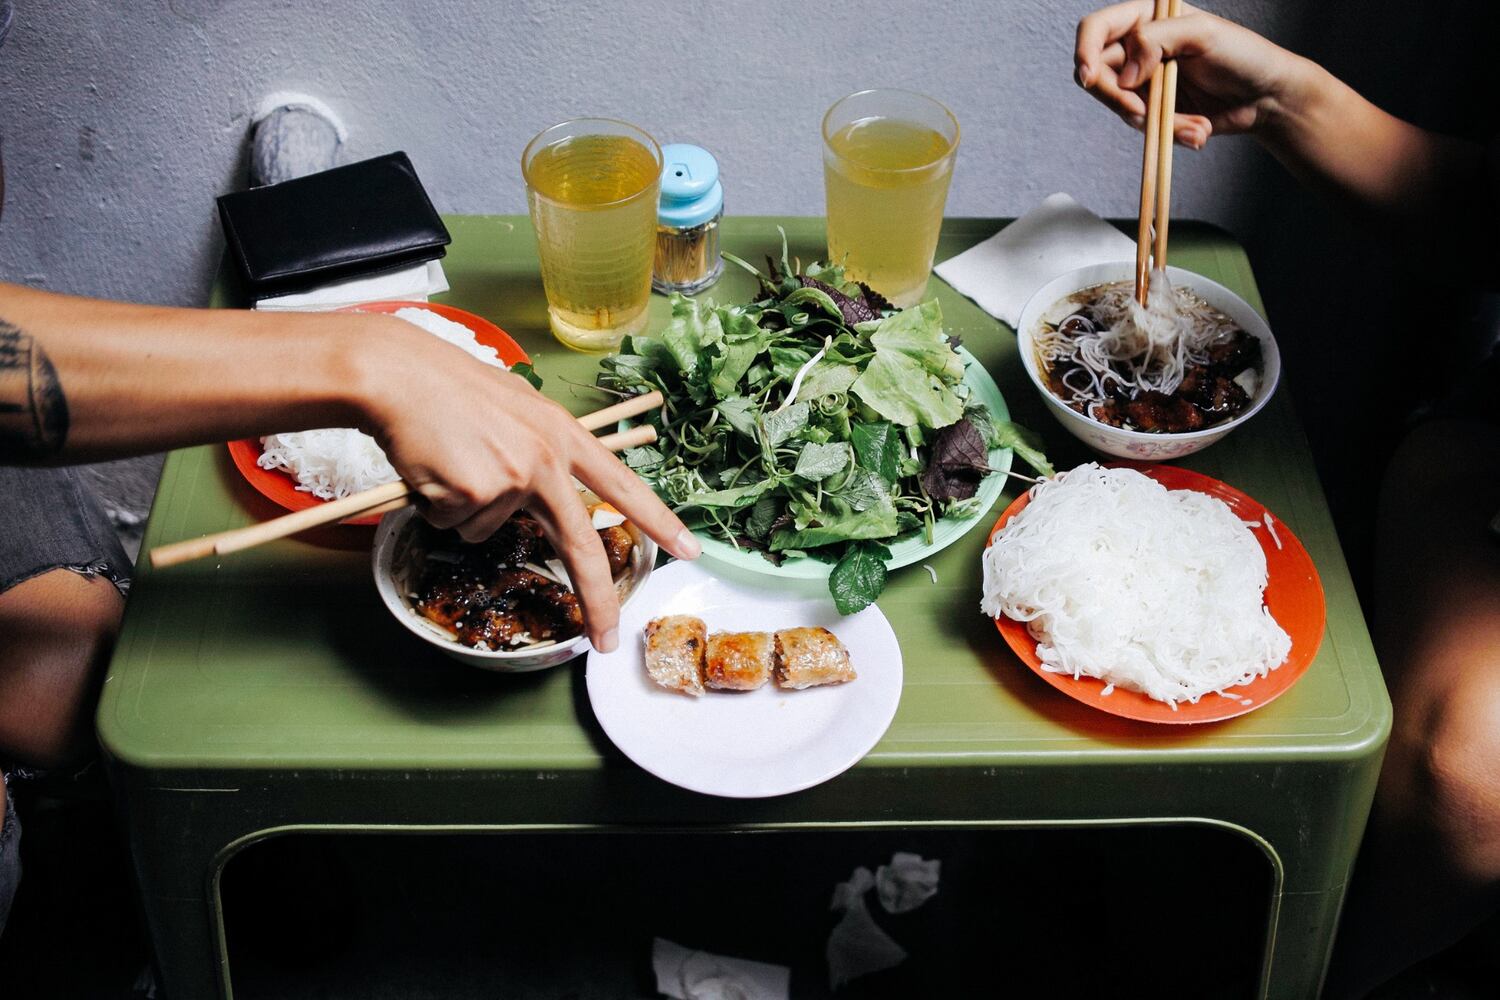 Vietnamese meal of grilled meat, fresh herbs, rice noodles served on plastic plates on a small table.